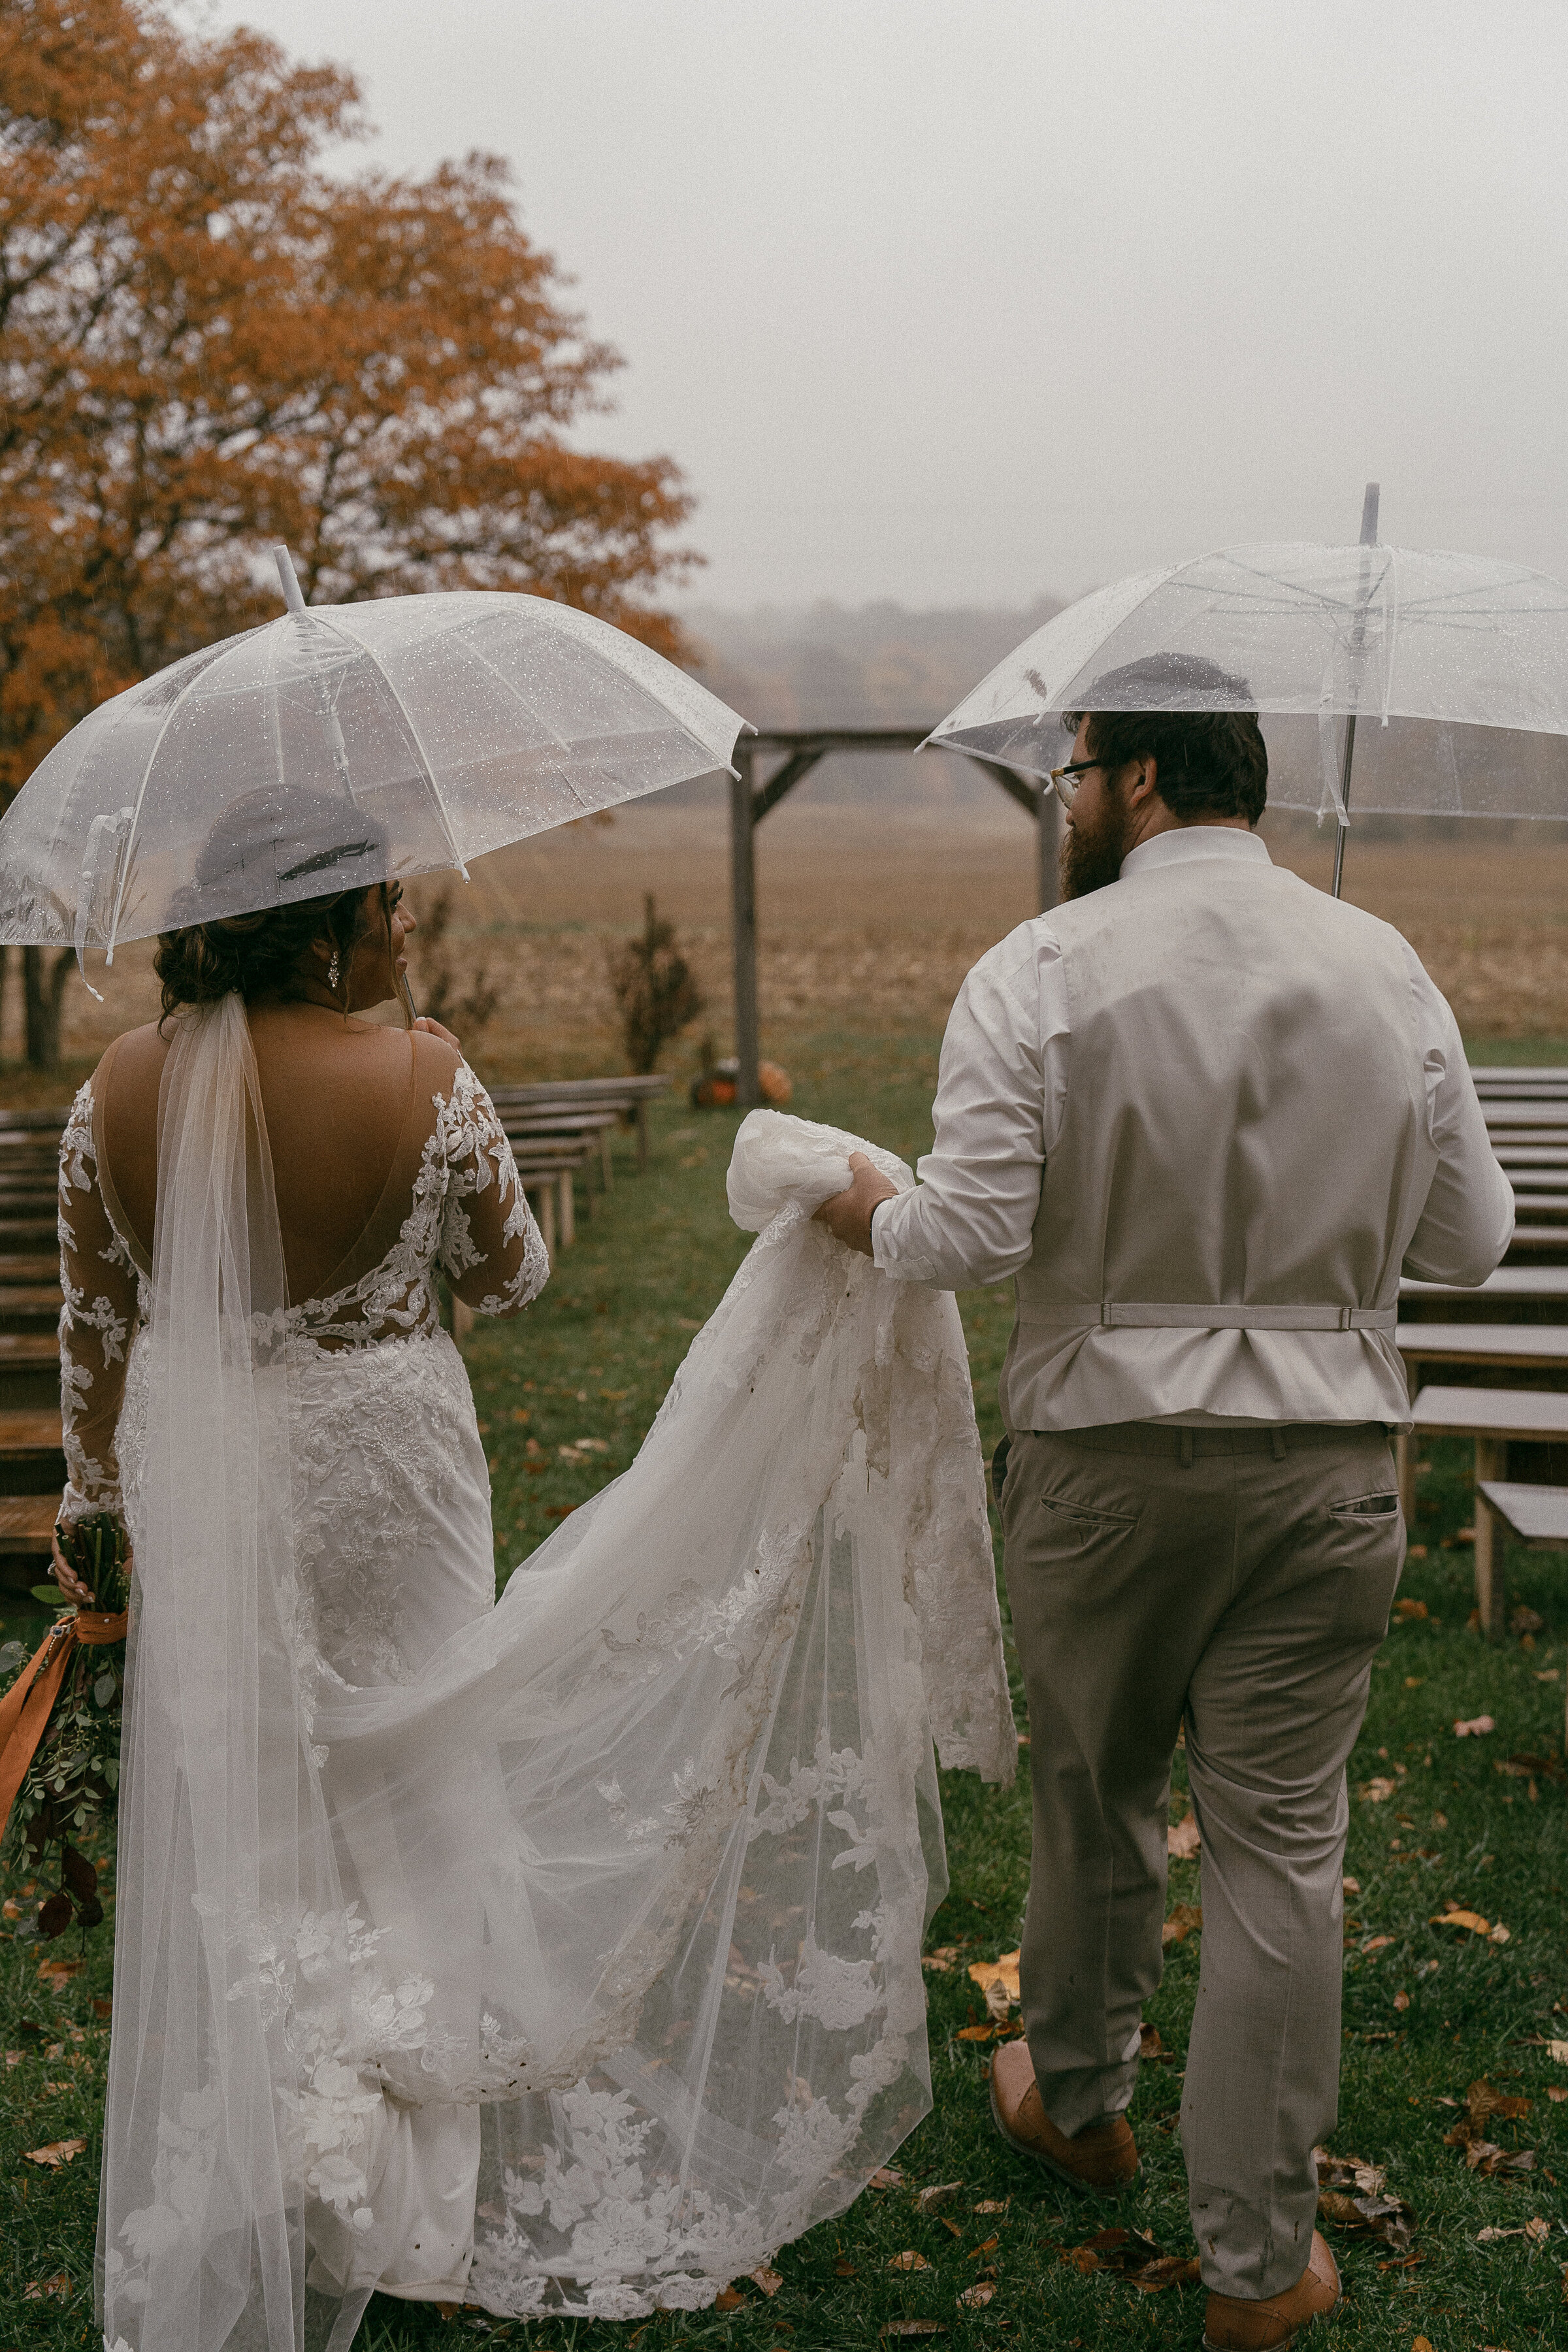 Bride and groom walking under clear umbrellas on a rainy day.